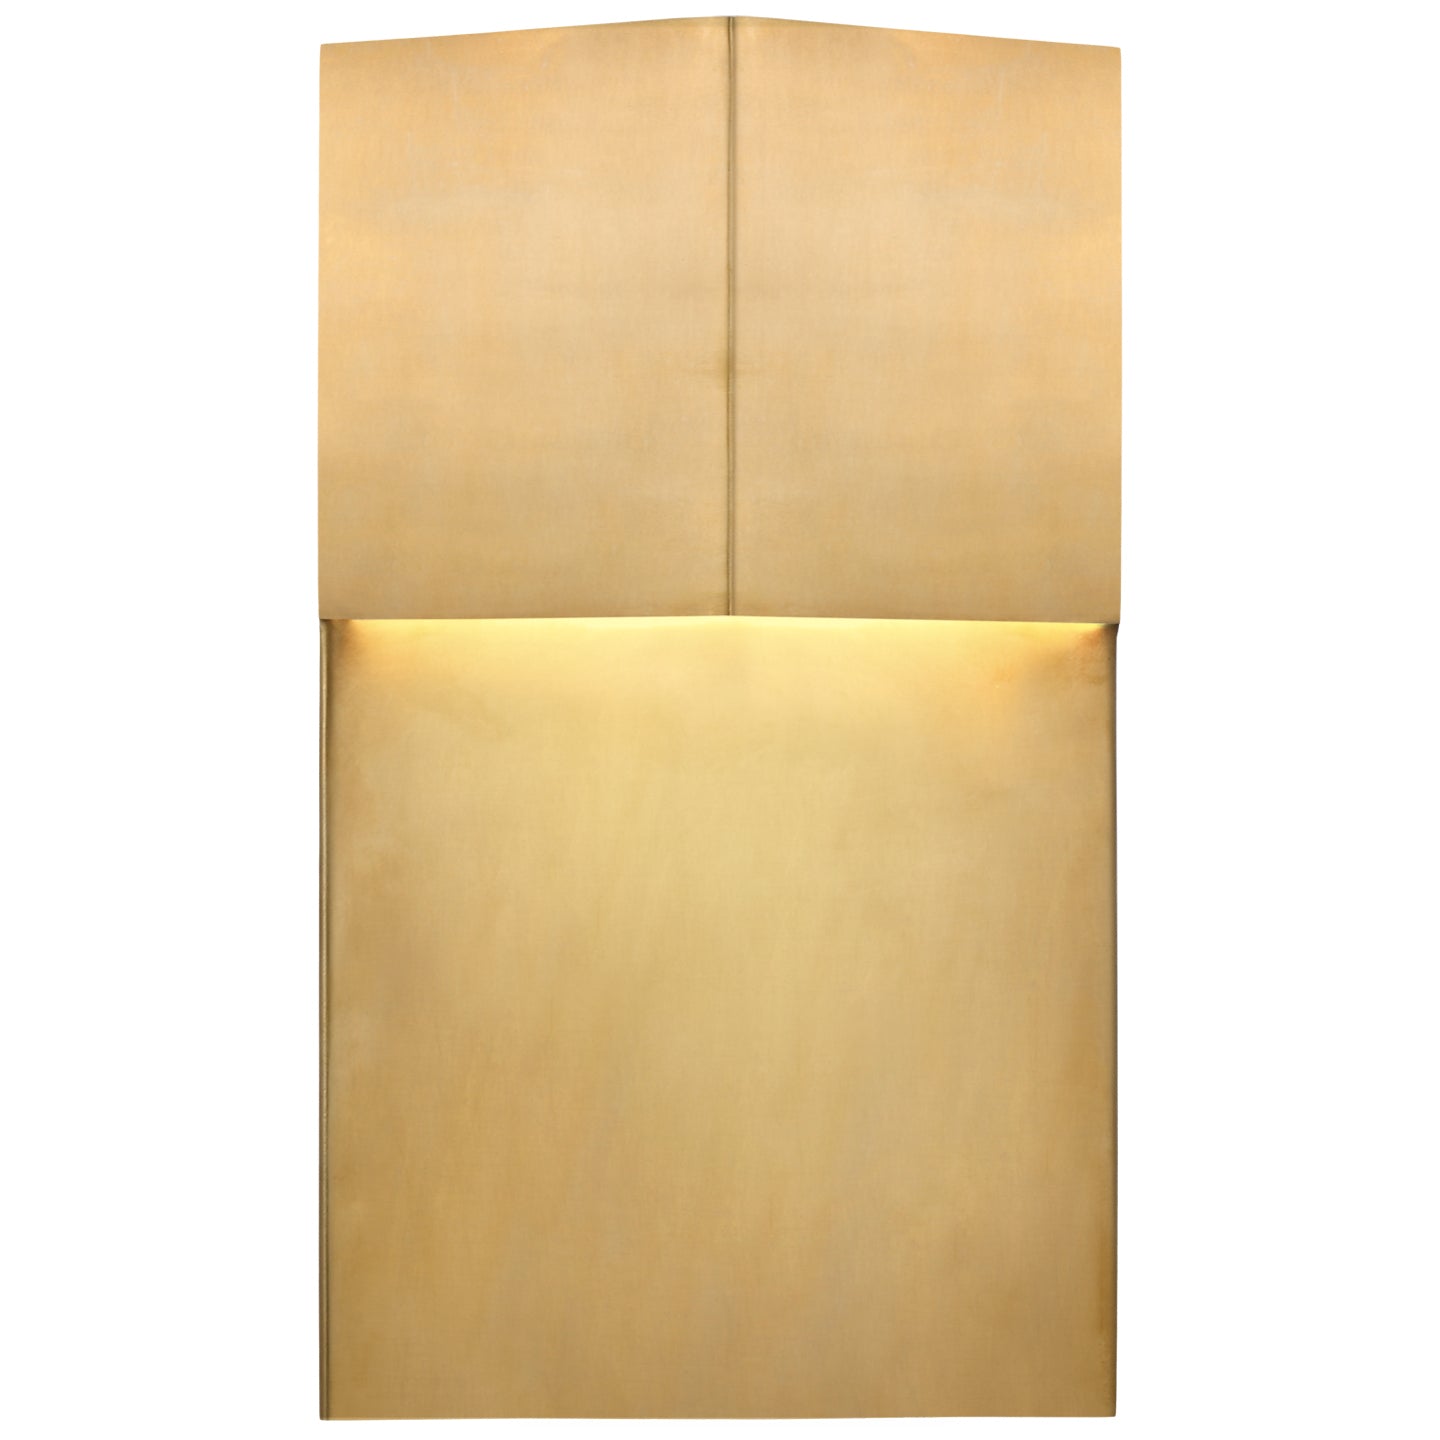 Visual Comfort Signature - KW 2781AB - LED Outdoor Wall Sconce - Rega - Antique-Burnished Brass